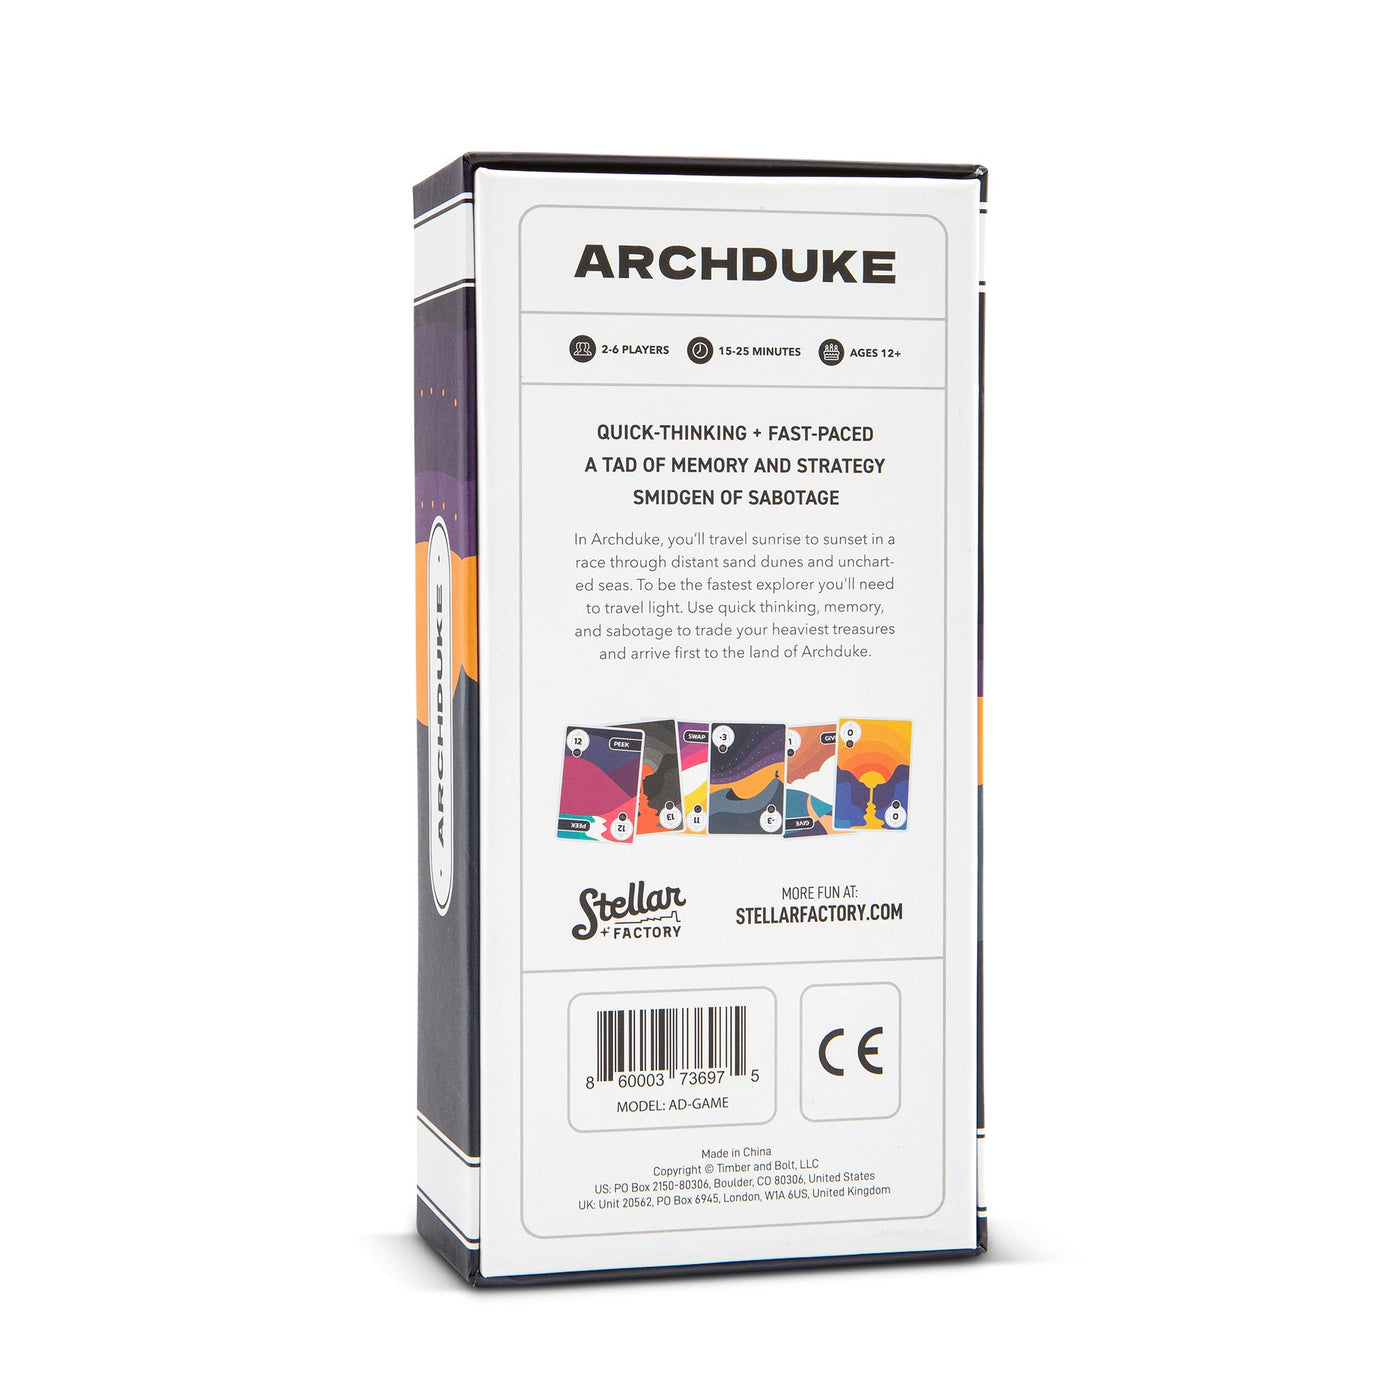 Back of packaging for Archduke game